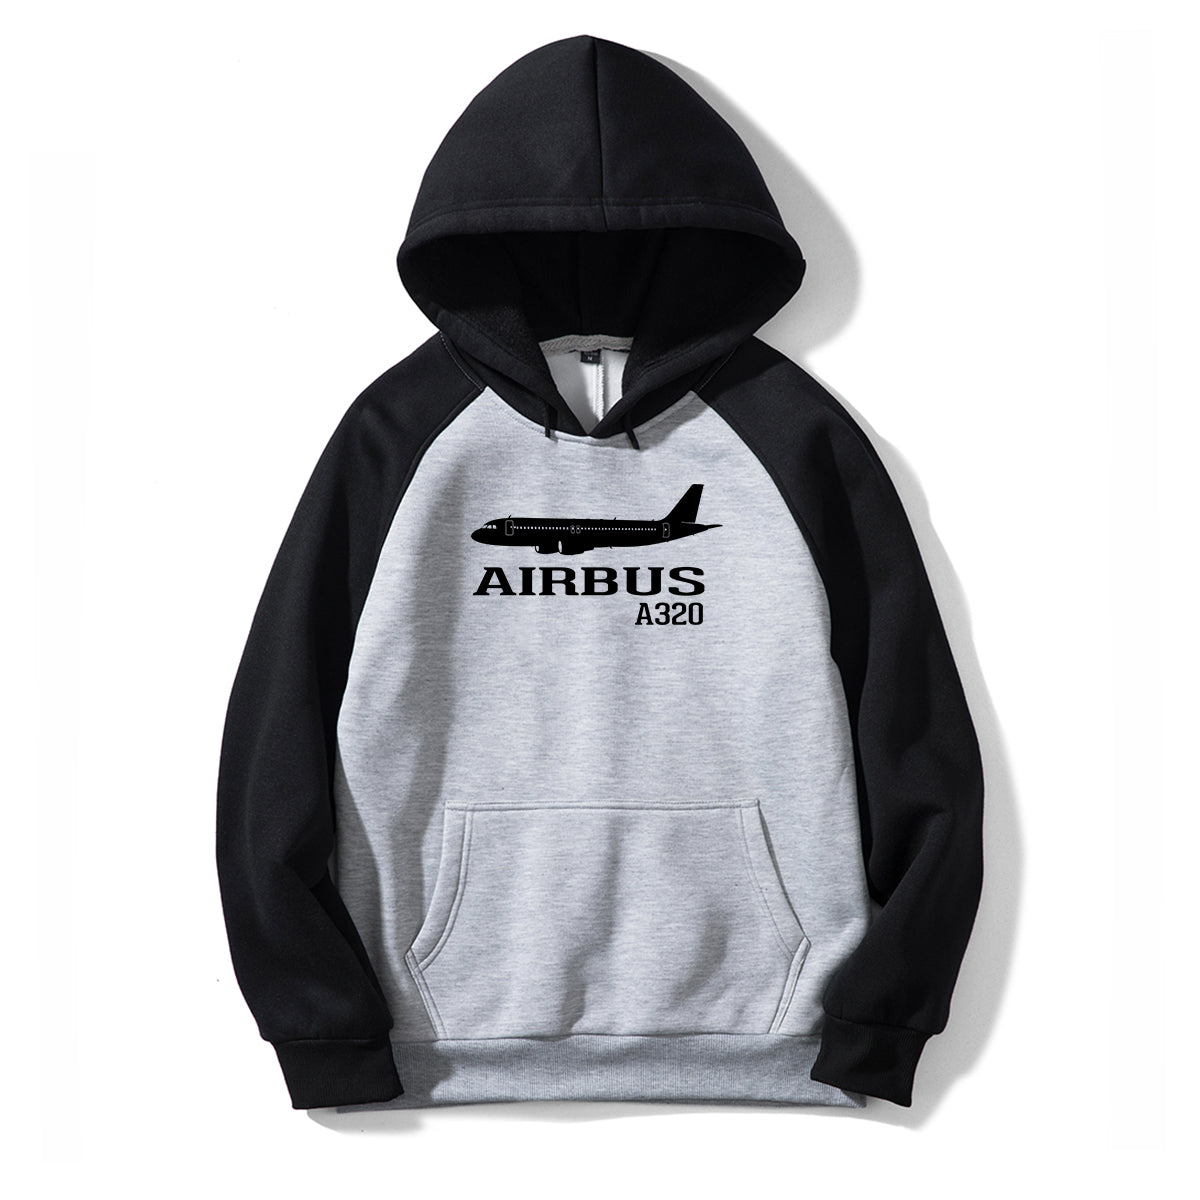 Airbus A320 Printed Designed Colourful Hoodies